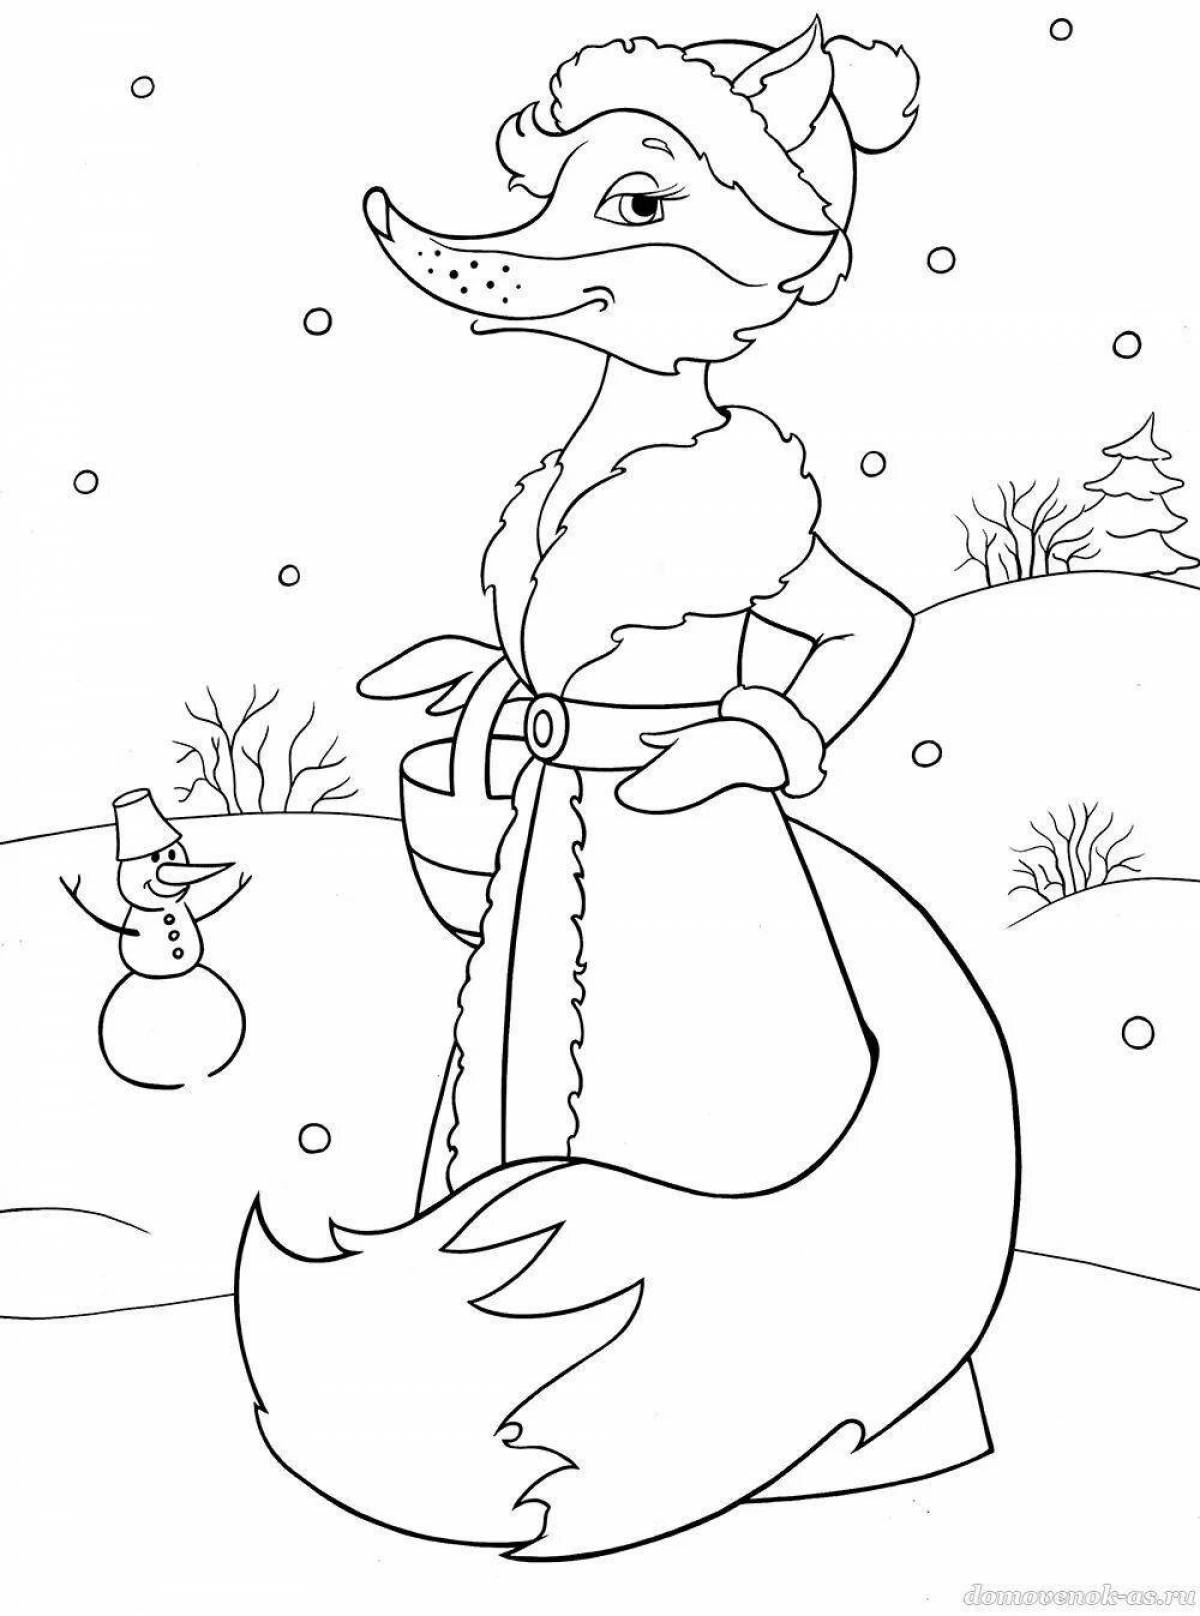 Coloring page gentle fox in winter